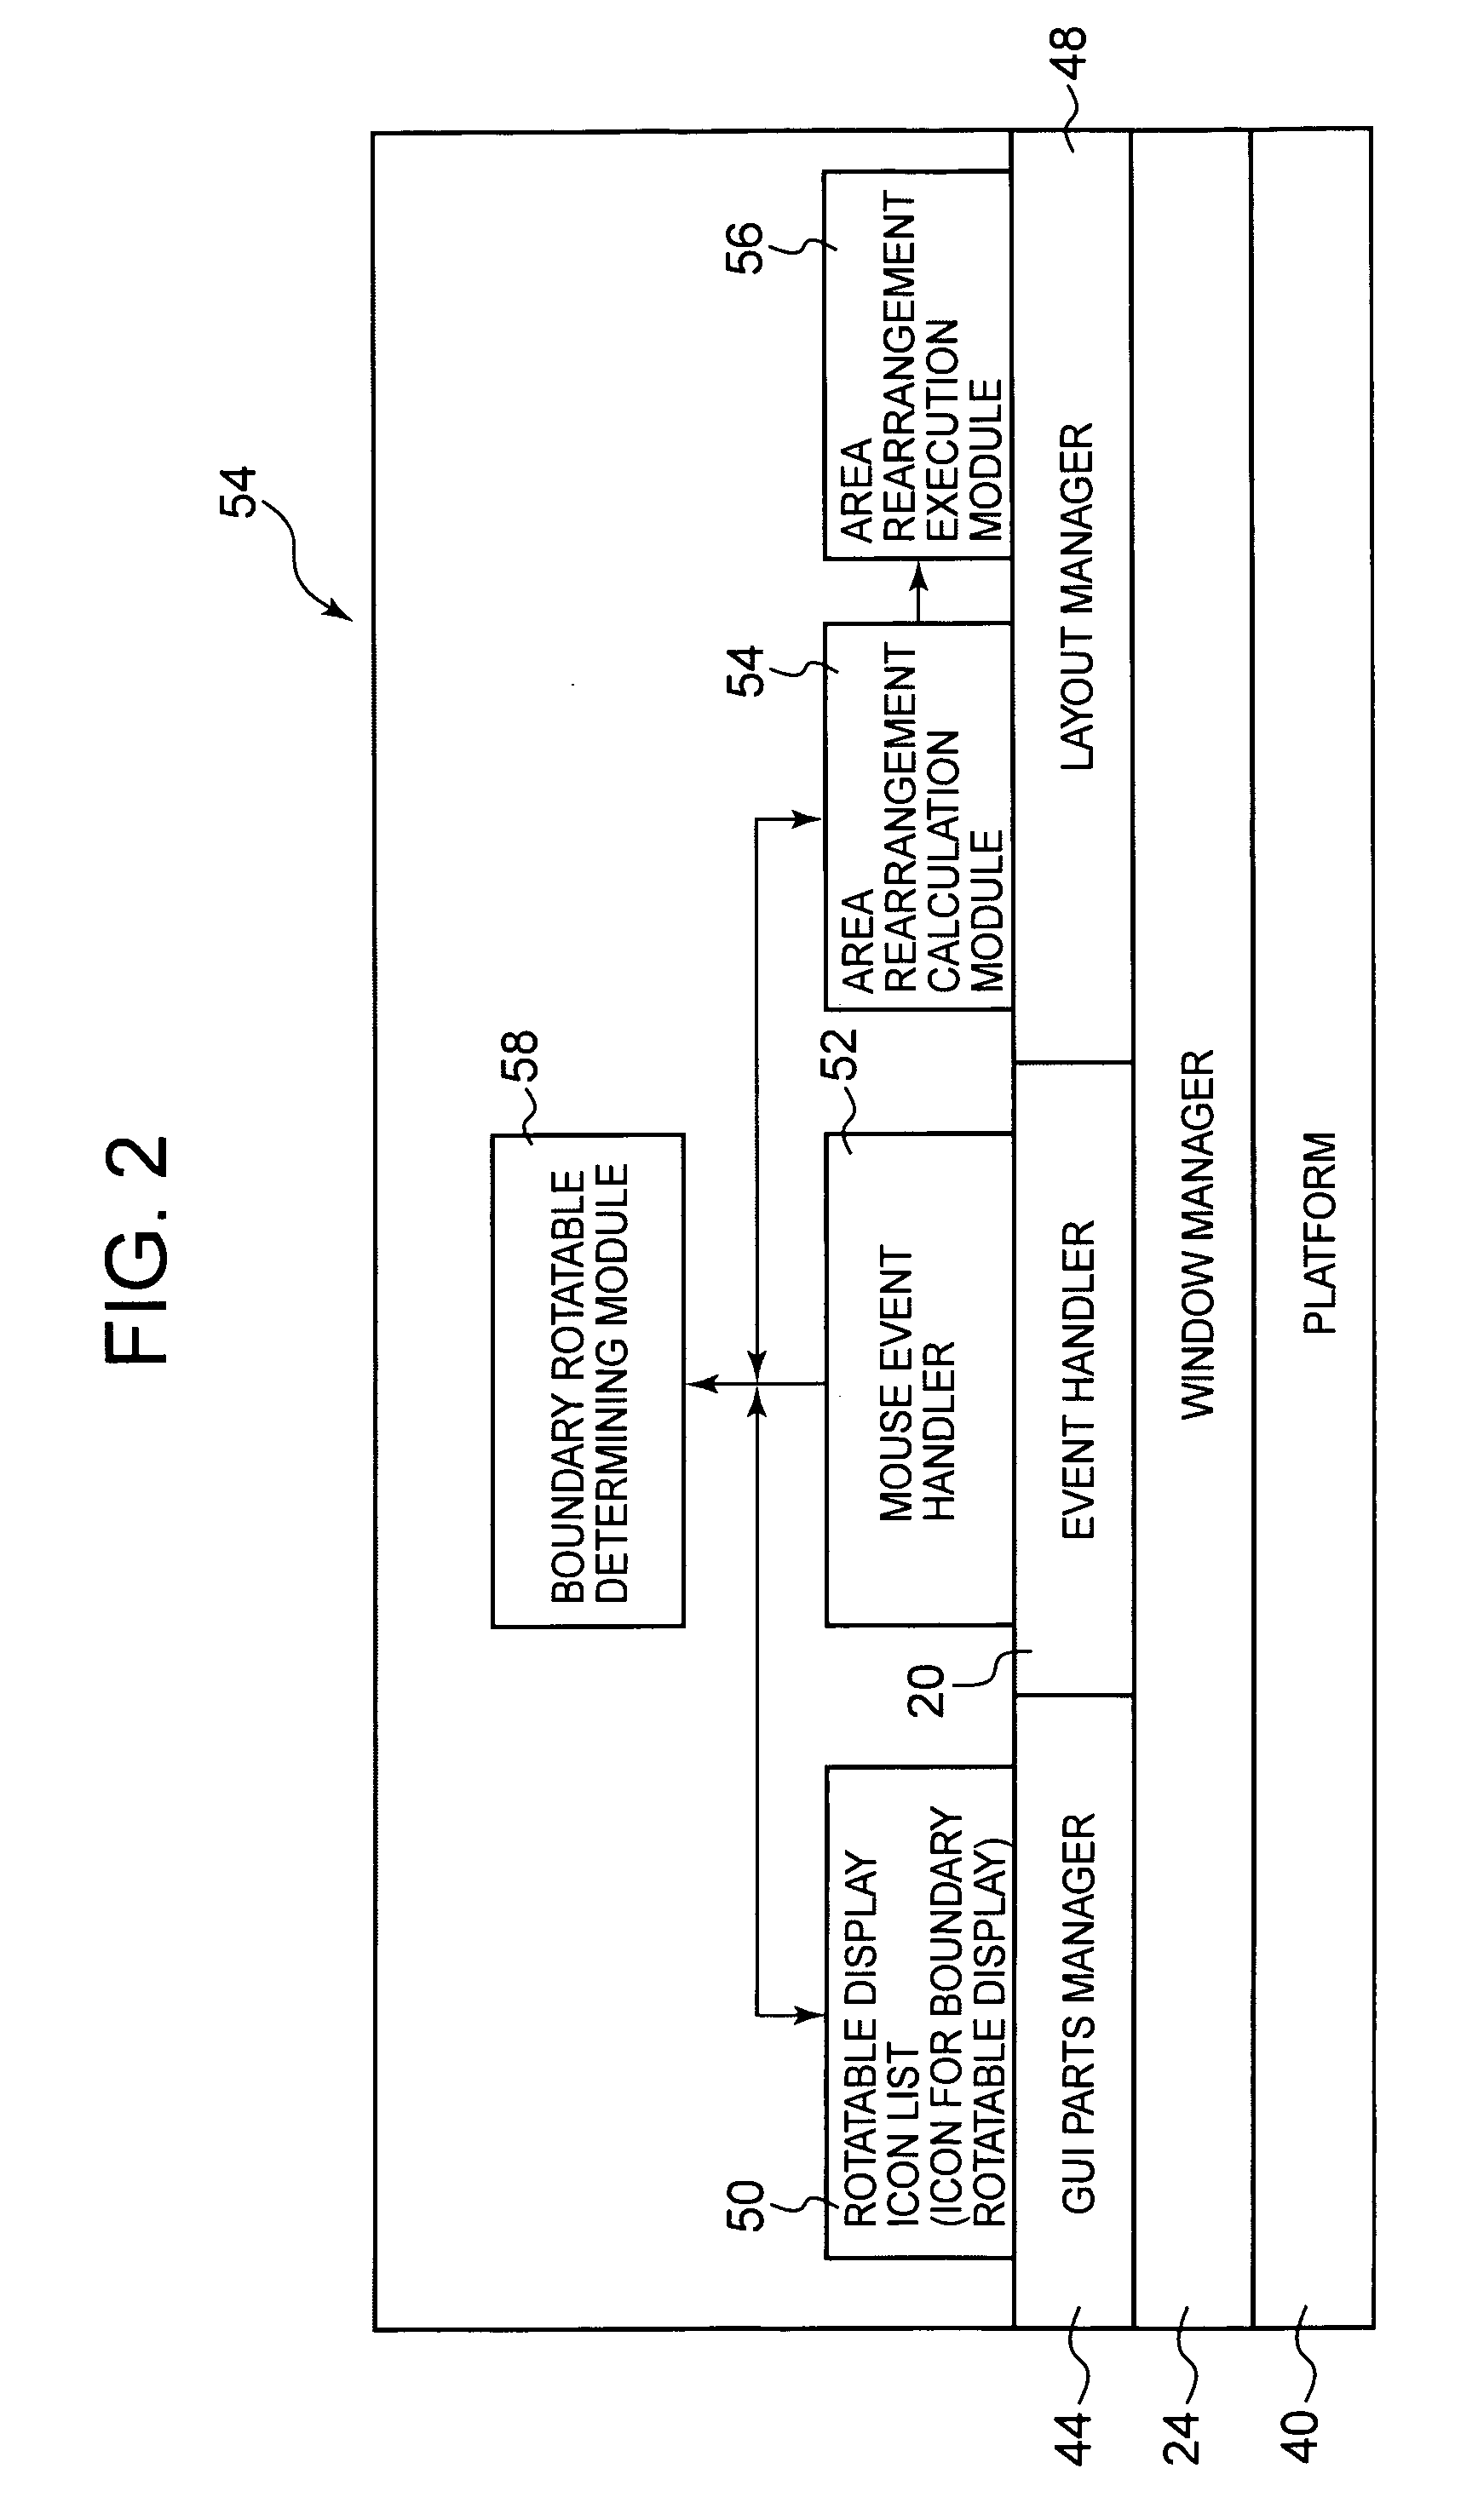 Apparatus, method and program product for rearraging frames